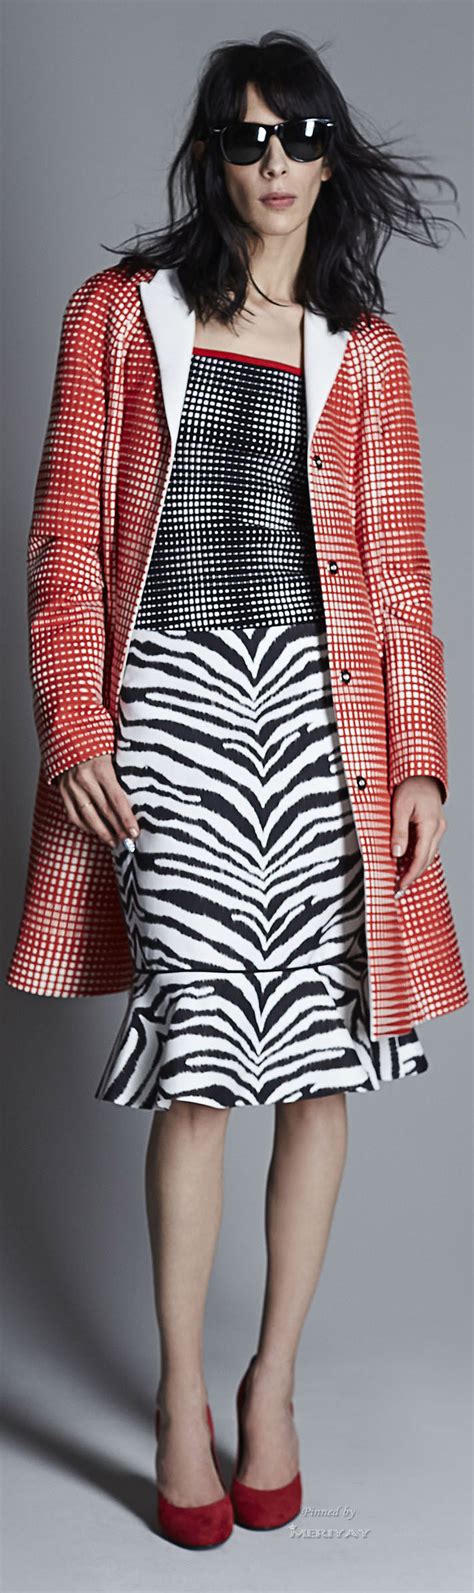 Emanuel Ungaro Resort 2015 The House Of Beccaria Love The Mix Of